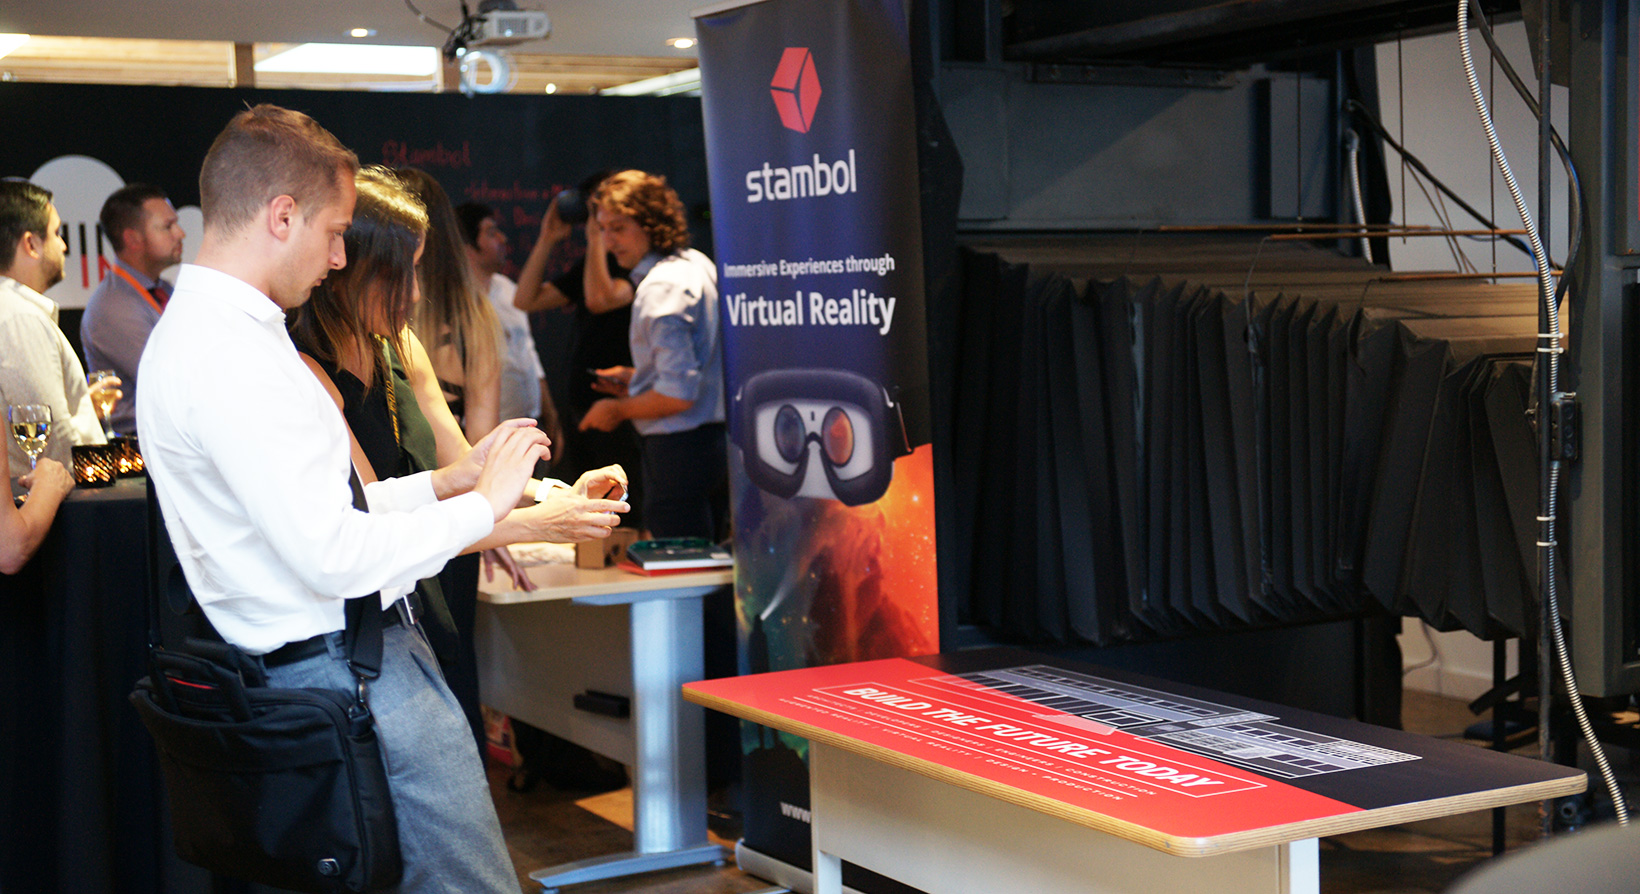 Young guest looking at Stambol Augmented Reality app